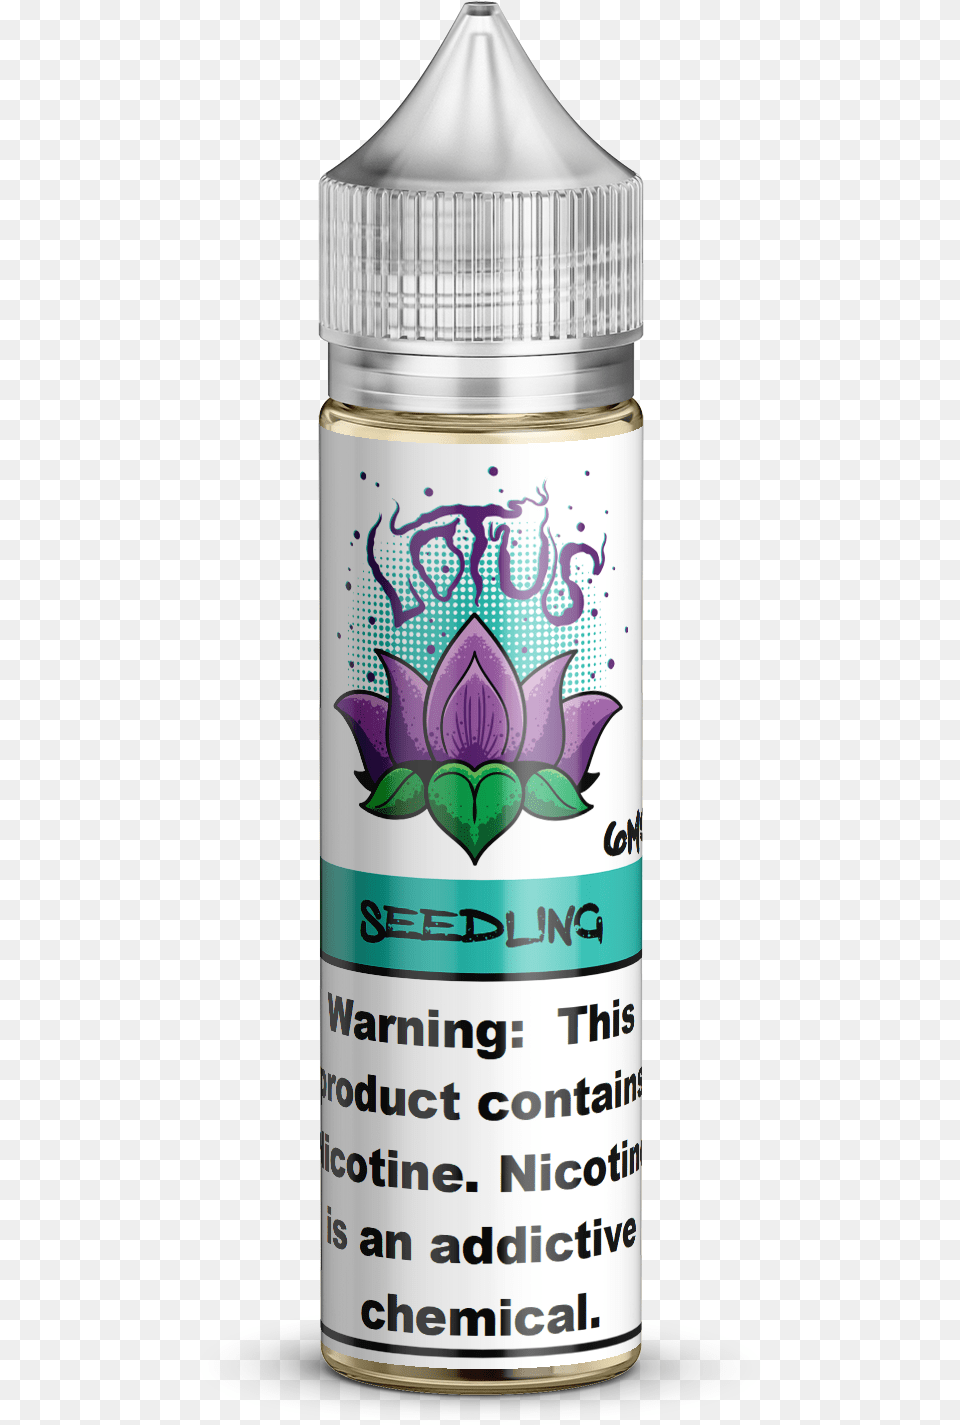 Lotus Seedling Electronic Cigarette, Bottle, Cosmetics, Perfume, Paint Container Png Image